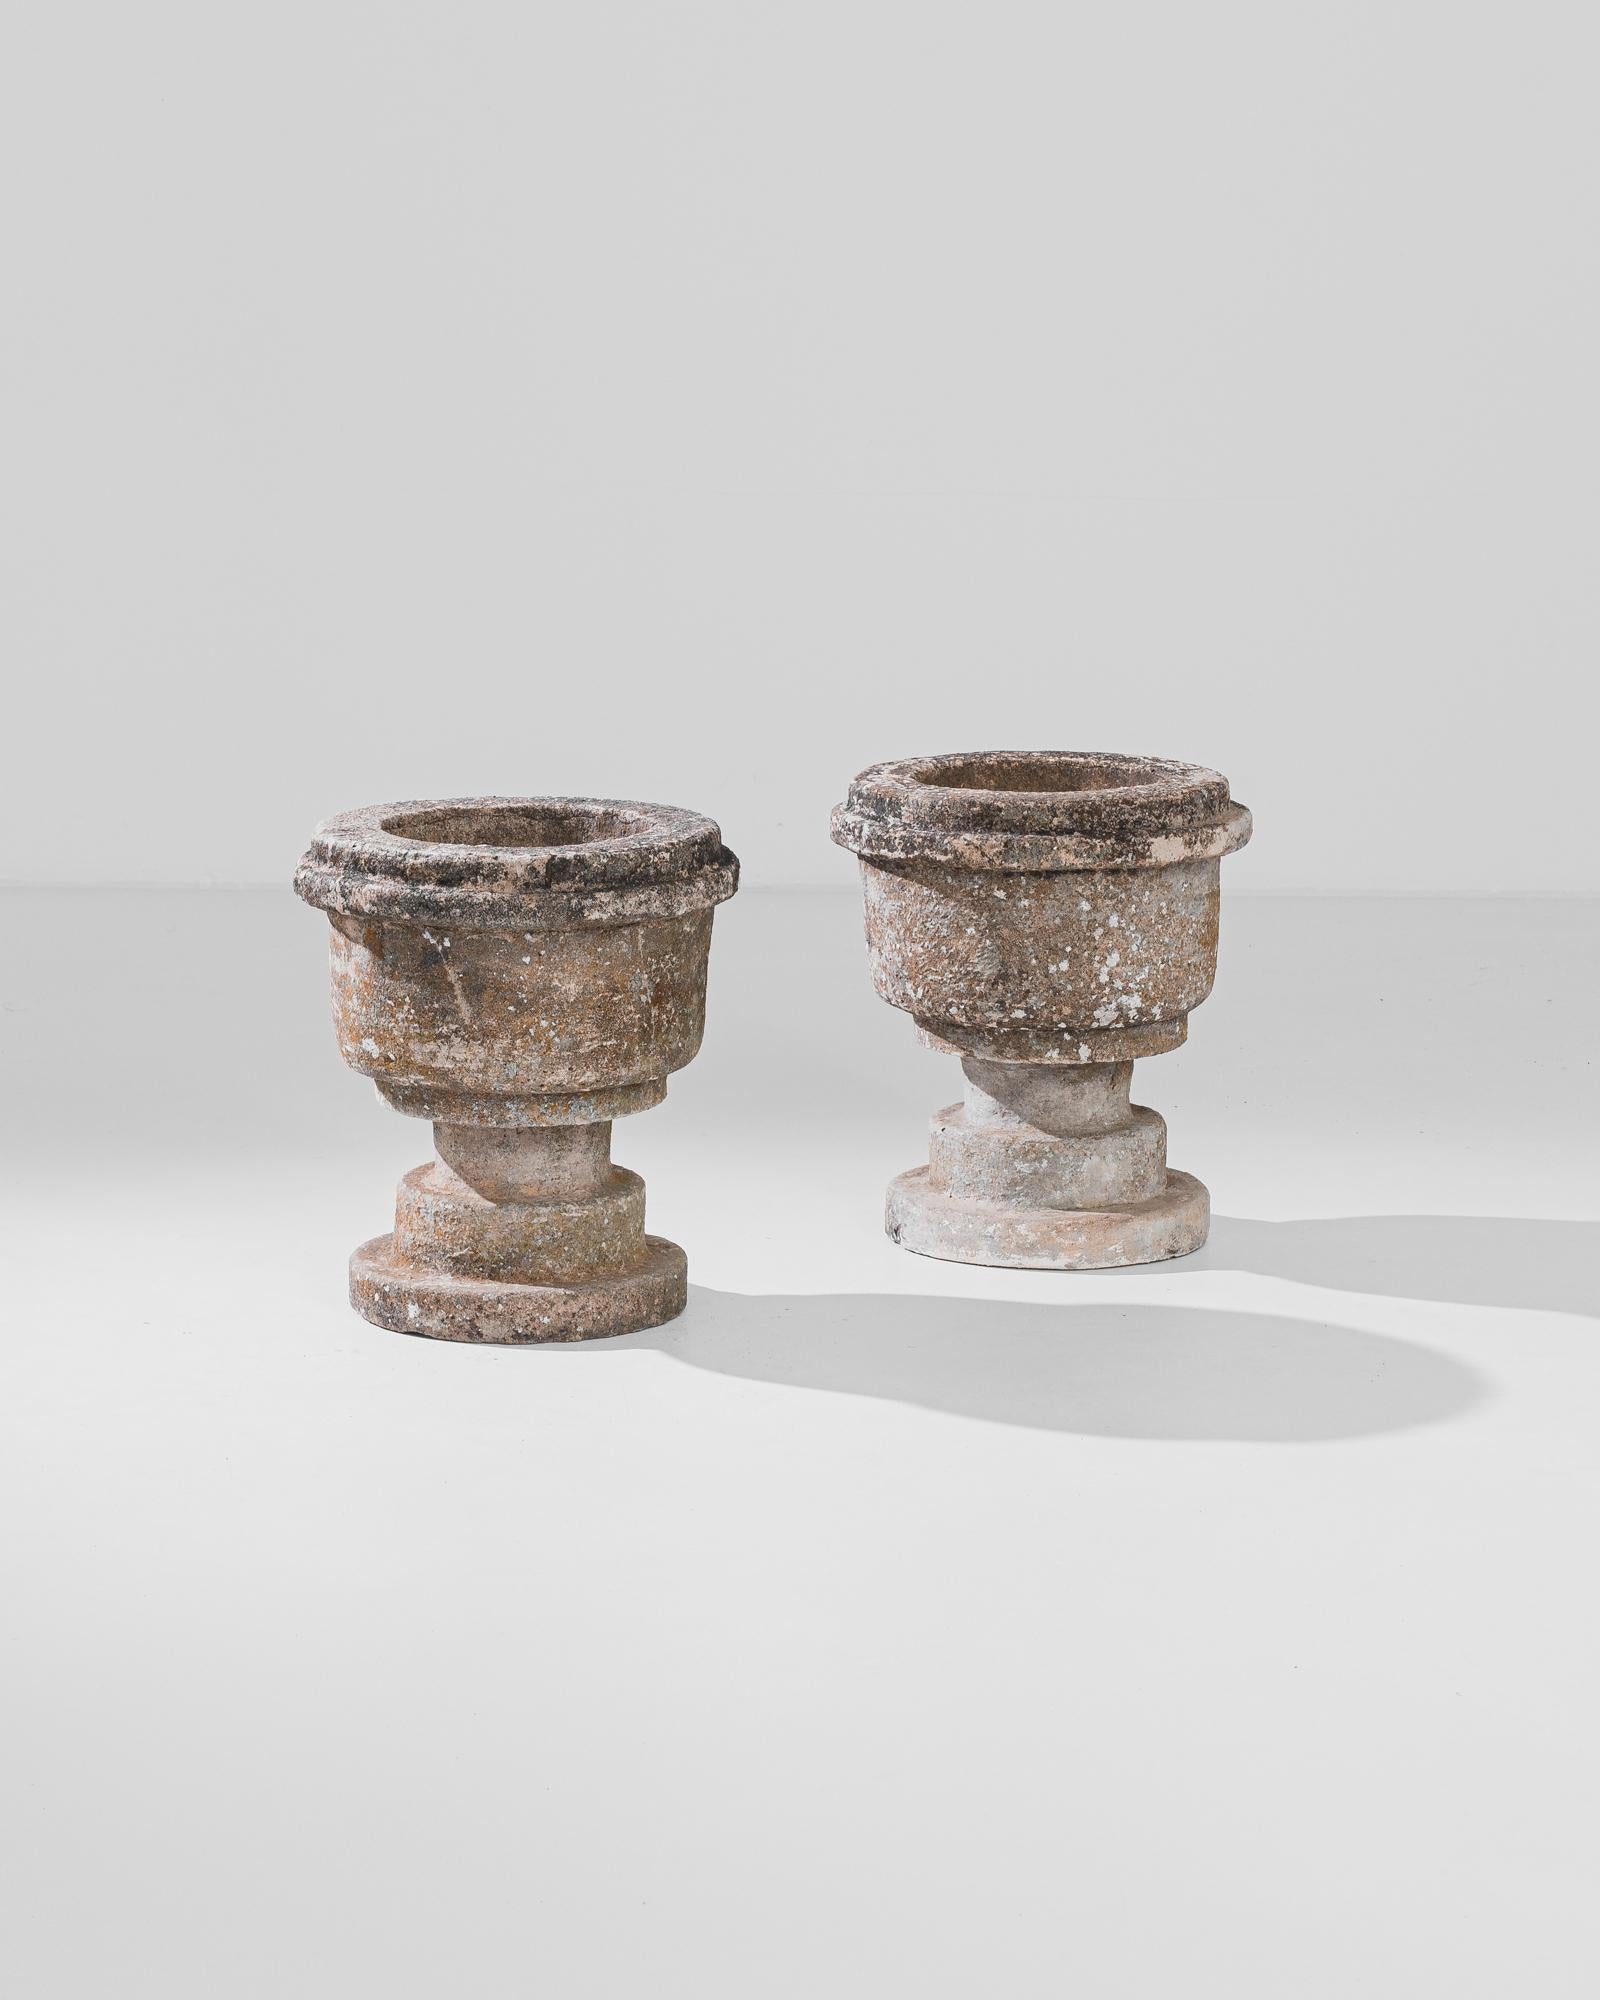 A pair of concrete planters from 1950s France. The symmetry of the rounded urn shape is doubled in the mirror-image of the twin forms. Minor variations in the finish of the natural concrete, weathered to a dappled color palette of lichen, peach and